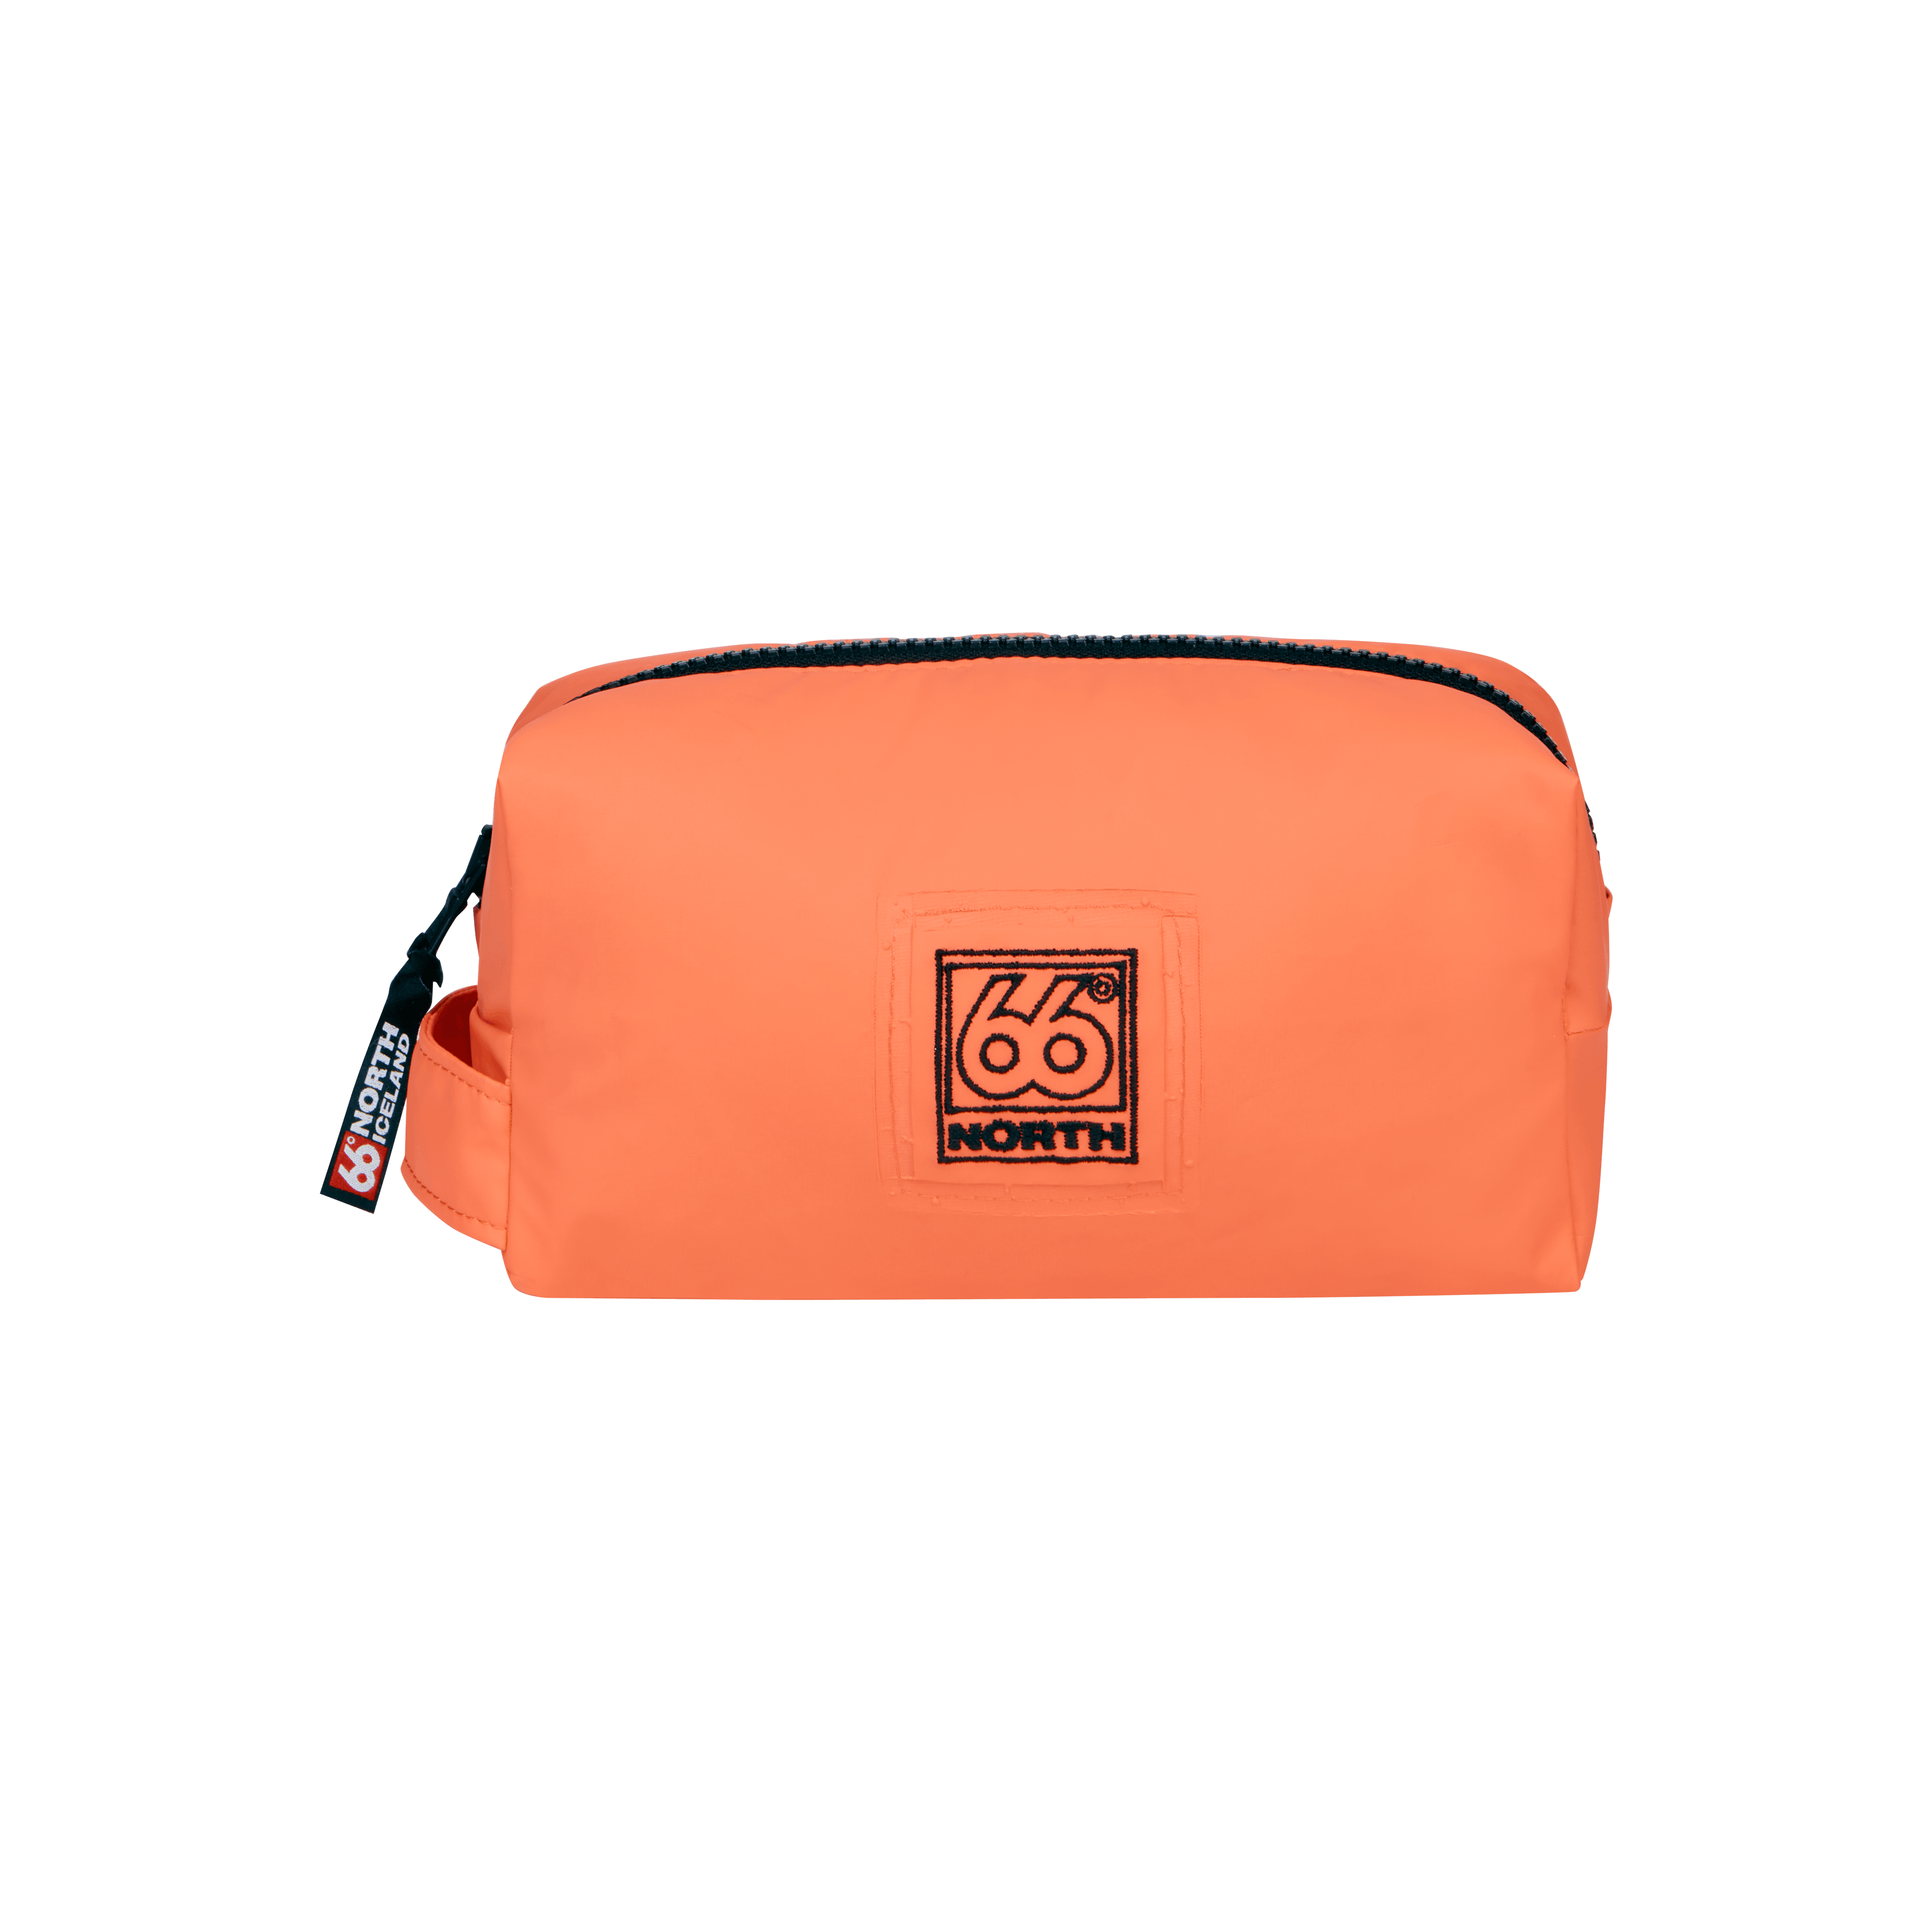 66 North Womens 66north Accessories - Tangerine - One Size